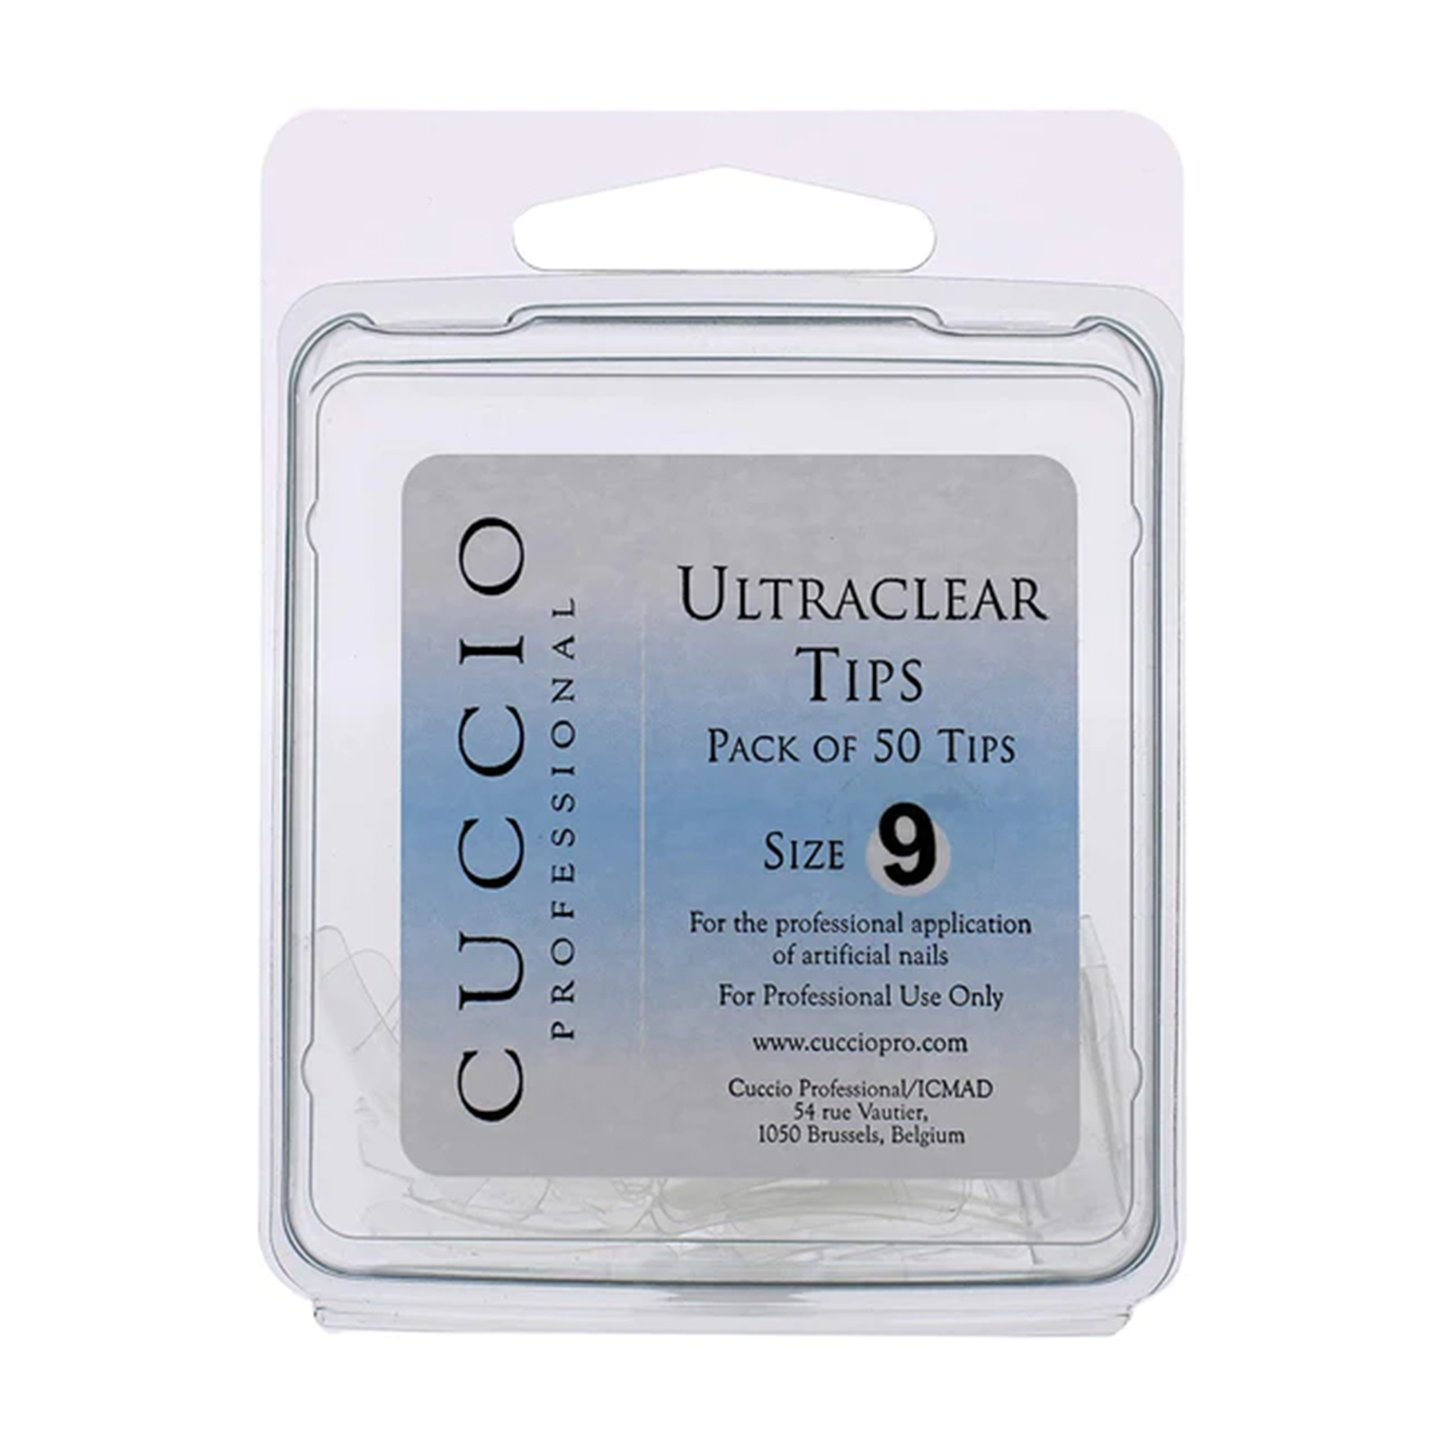 Ultraclear Tips Size 9